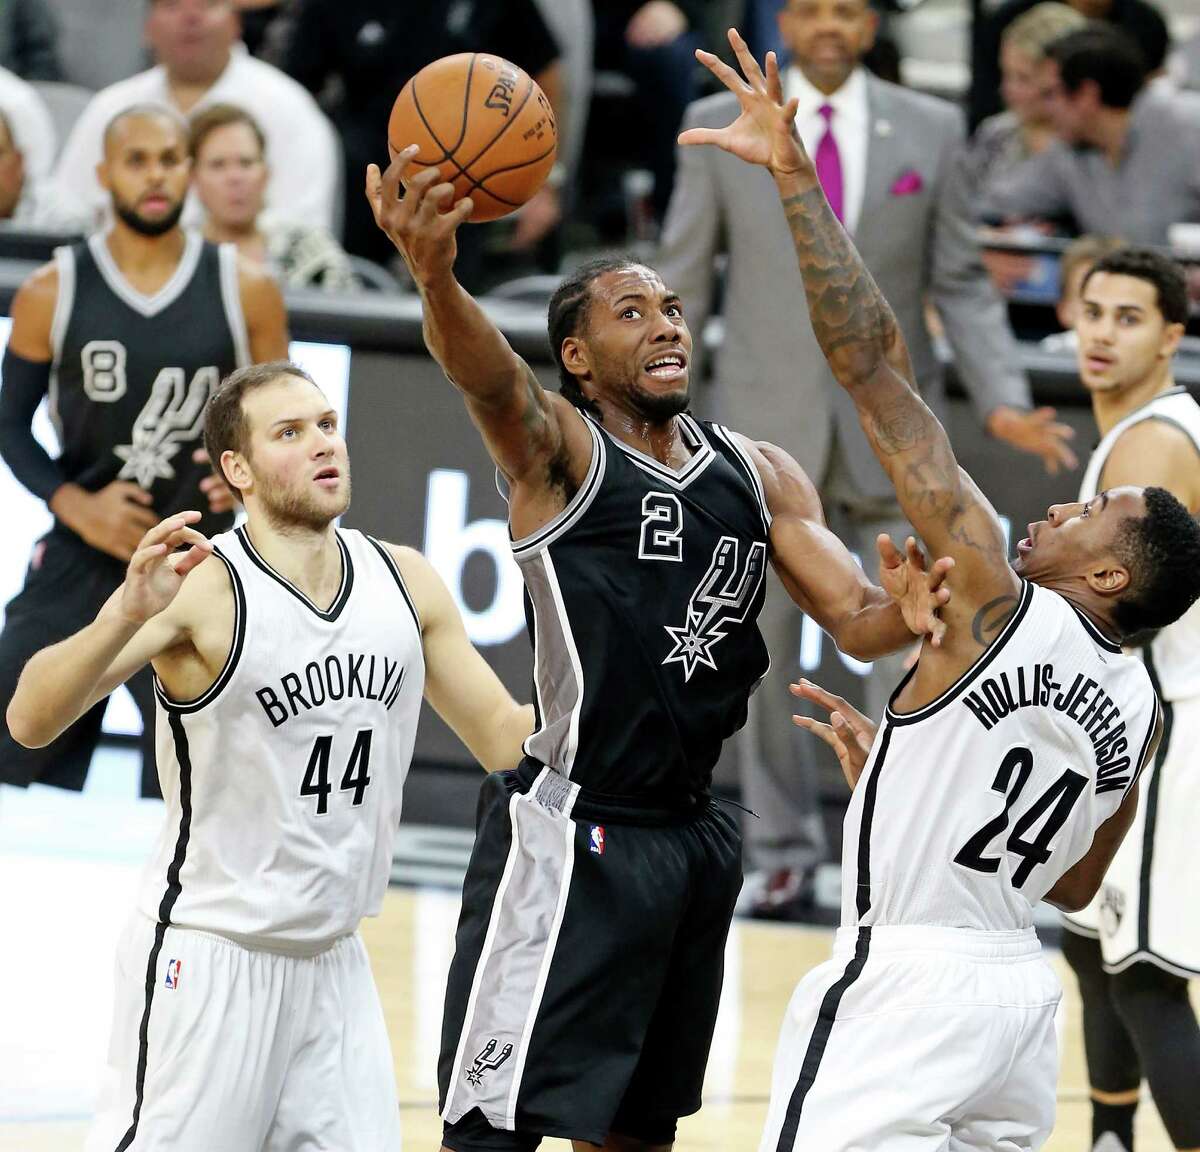 San Antonio Spurs' Kawhi Leonard grabs for control of the ball between Brooklyn Nets' Bojan Bogdanovic (left) and Rondae Hollis-Jefferson during second half action Friday Oct. 30, 2015 at the AT&T Center. The Spurs won 102-75.